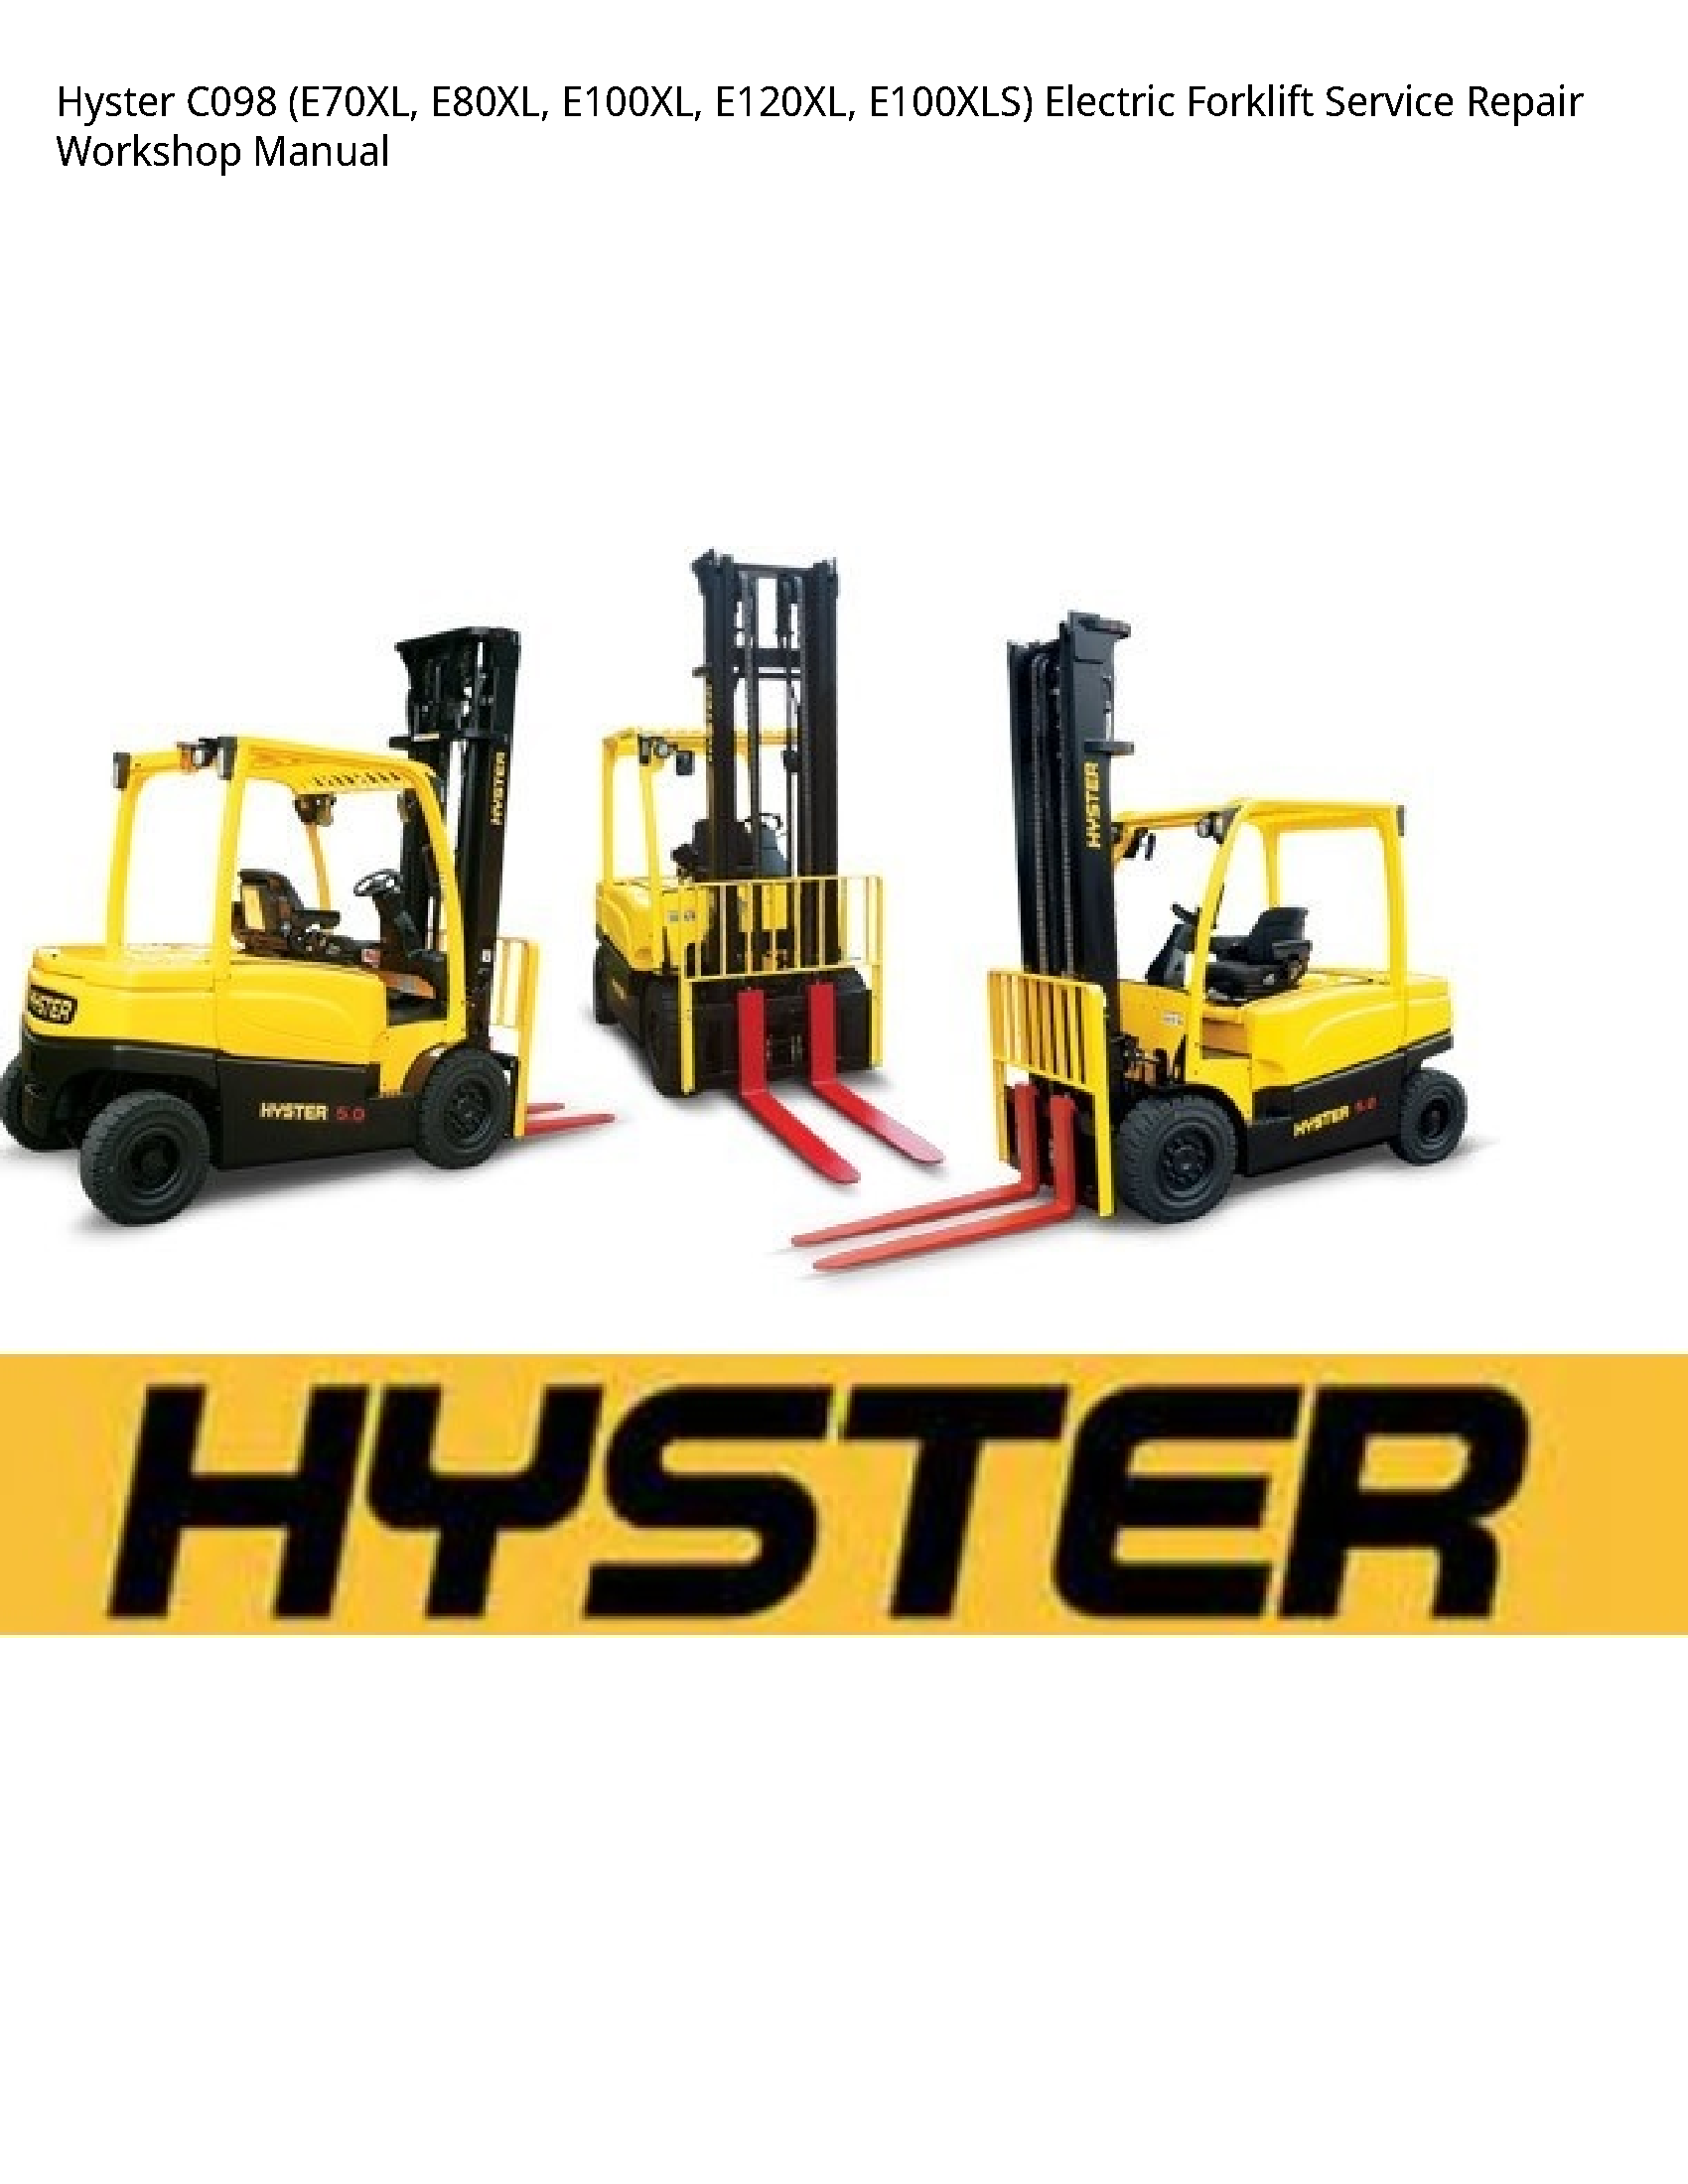 Hyster C098 Electric Forklift manual